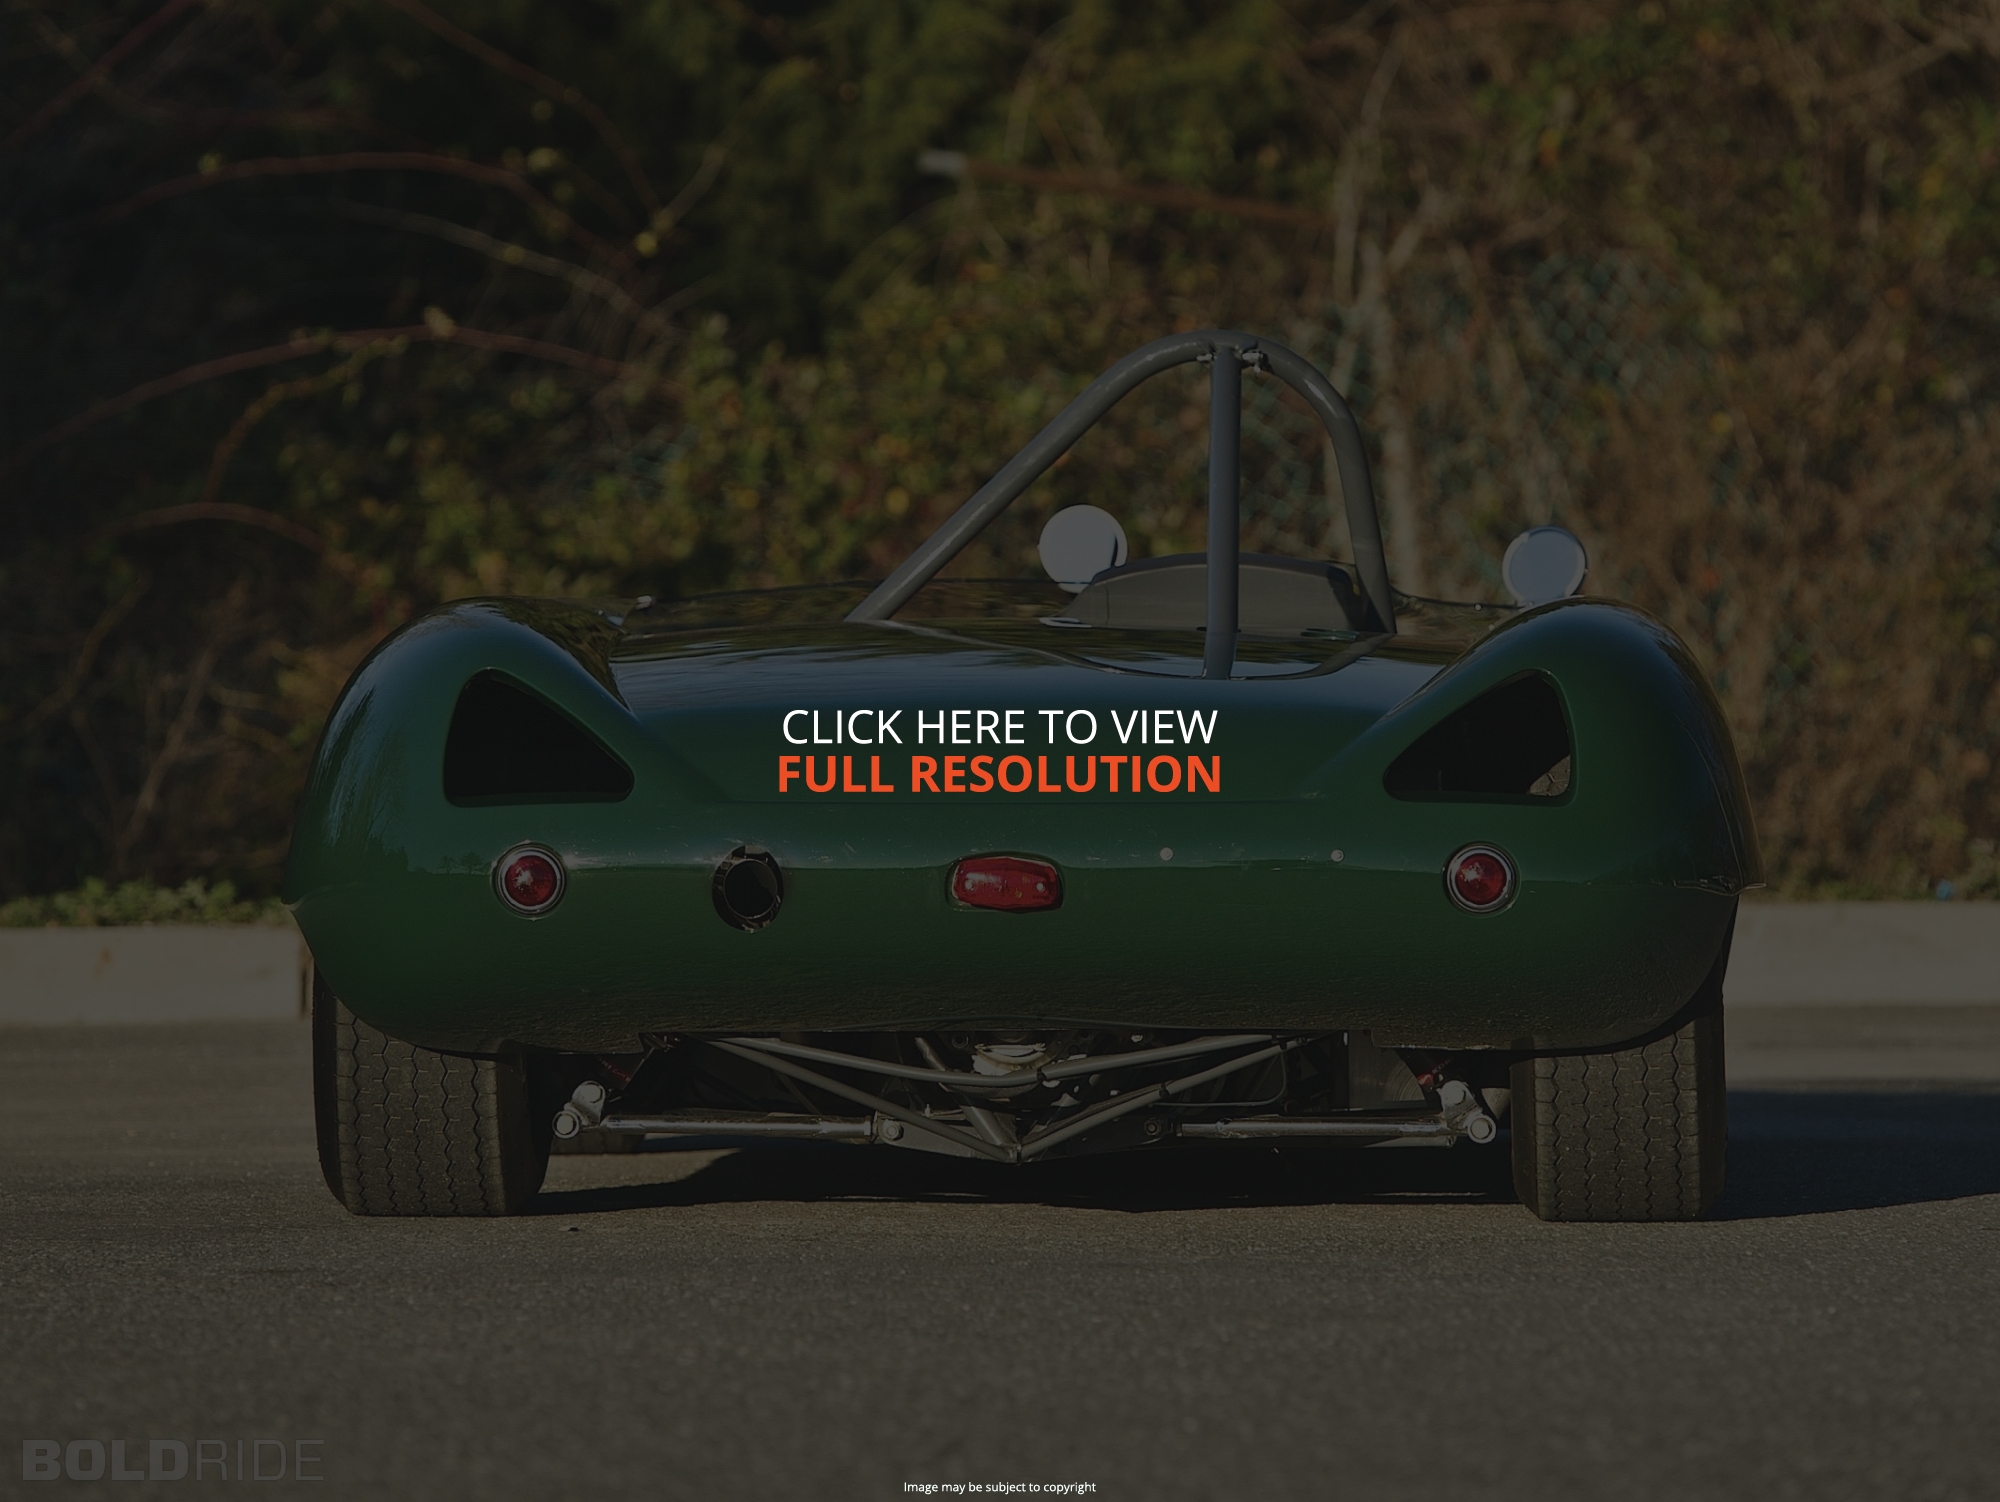 1962 Lotus 23B Sports Racer Boldride.com - Pictures, Wallpapers